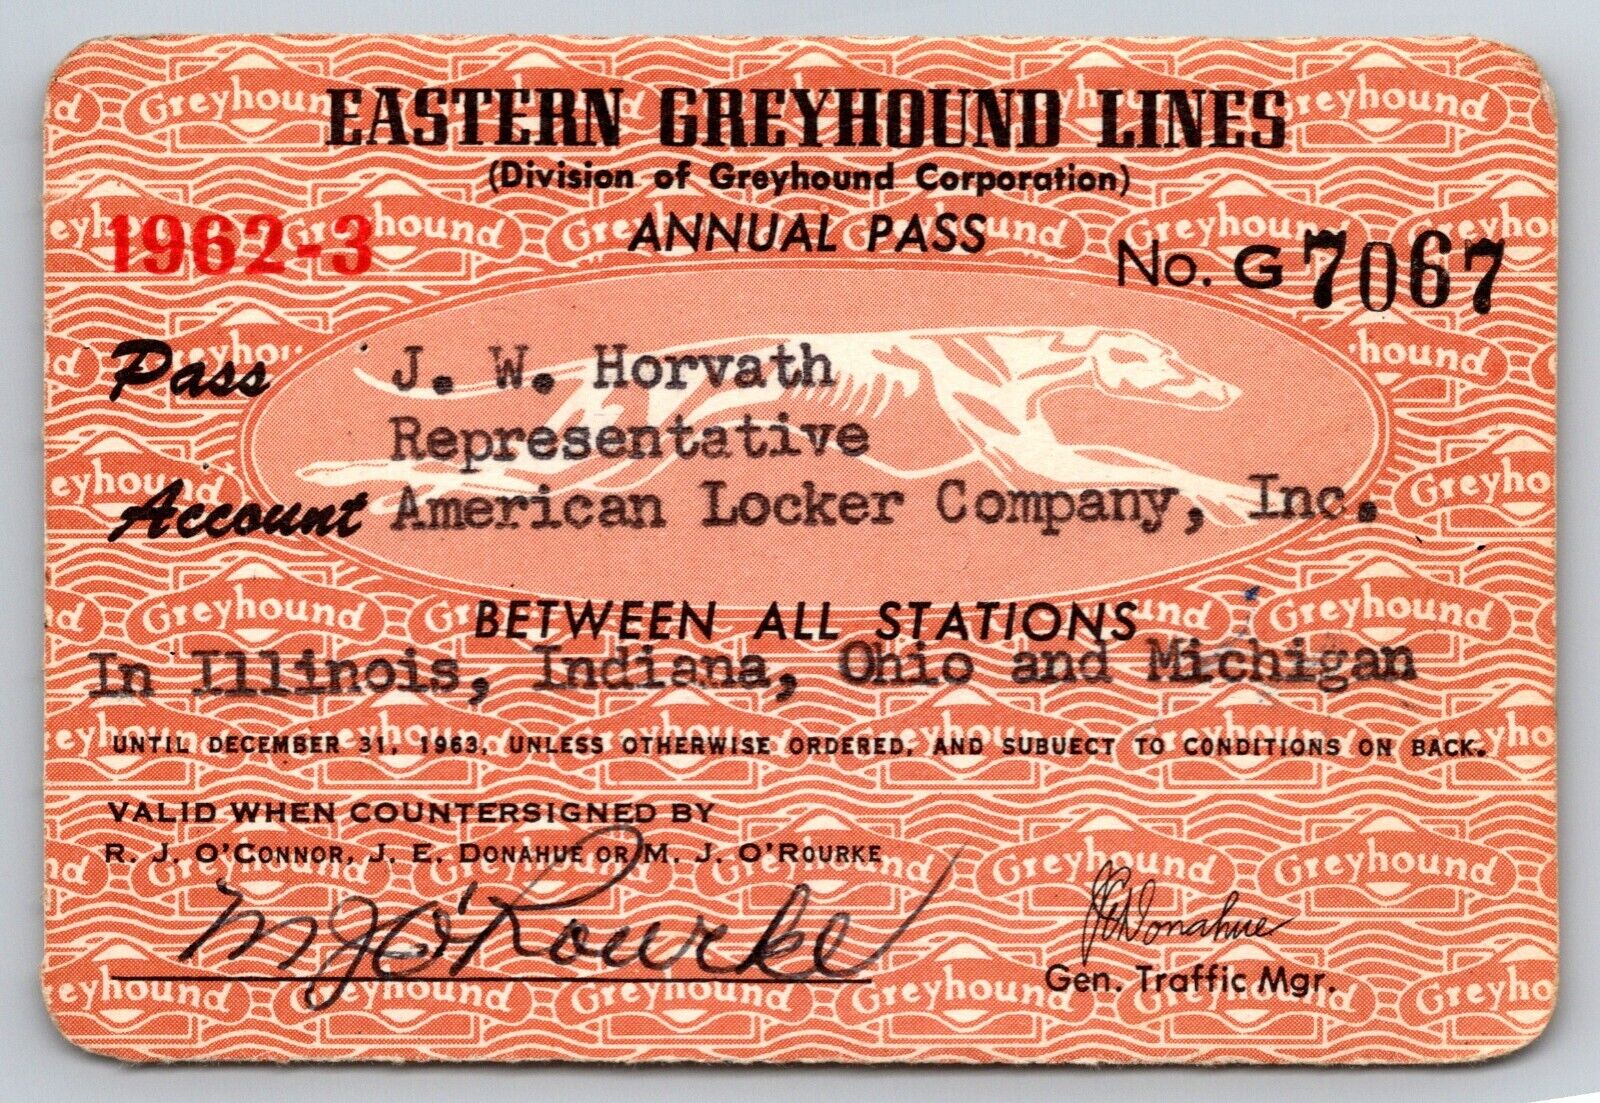 Eastern Greyhound Lines 1962-63 Annual / Yearly Bus Pass #7067